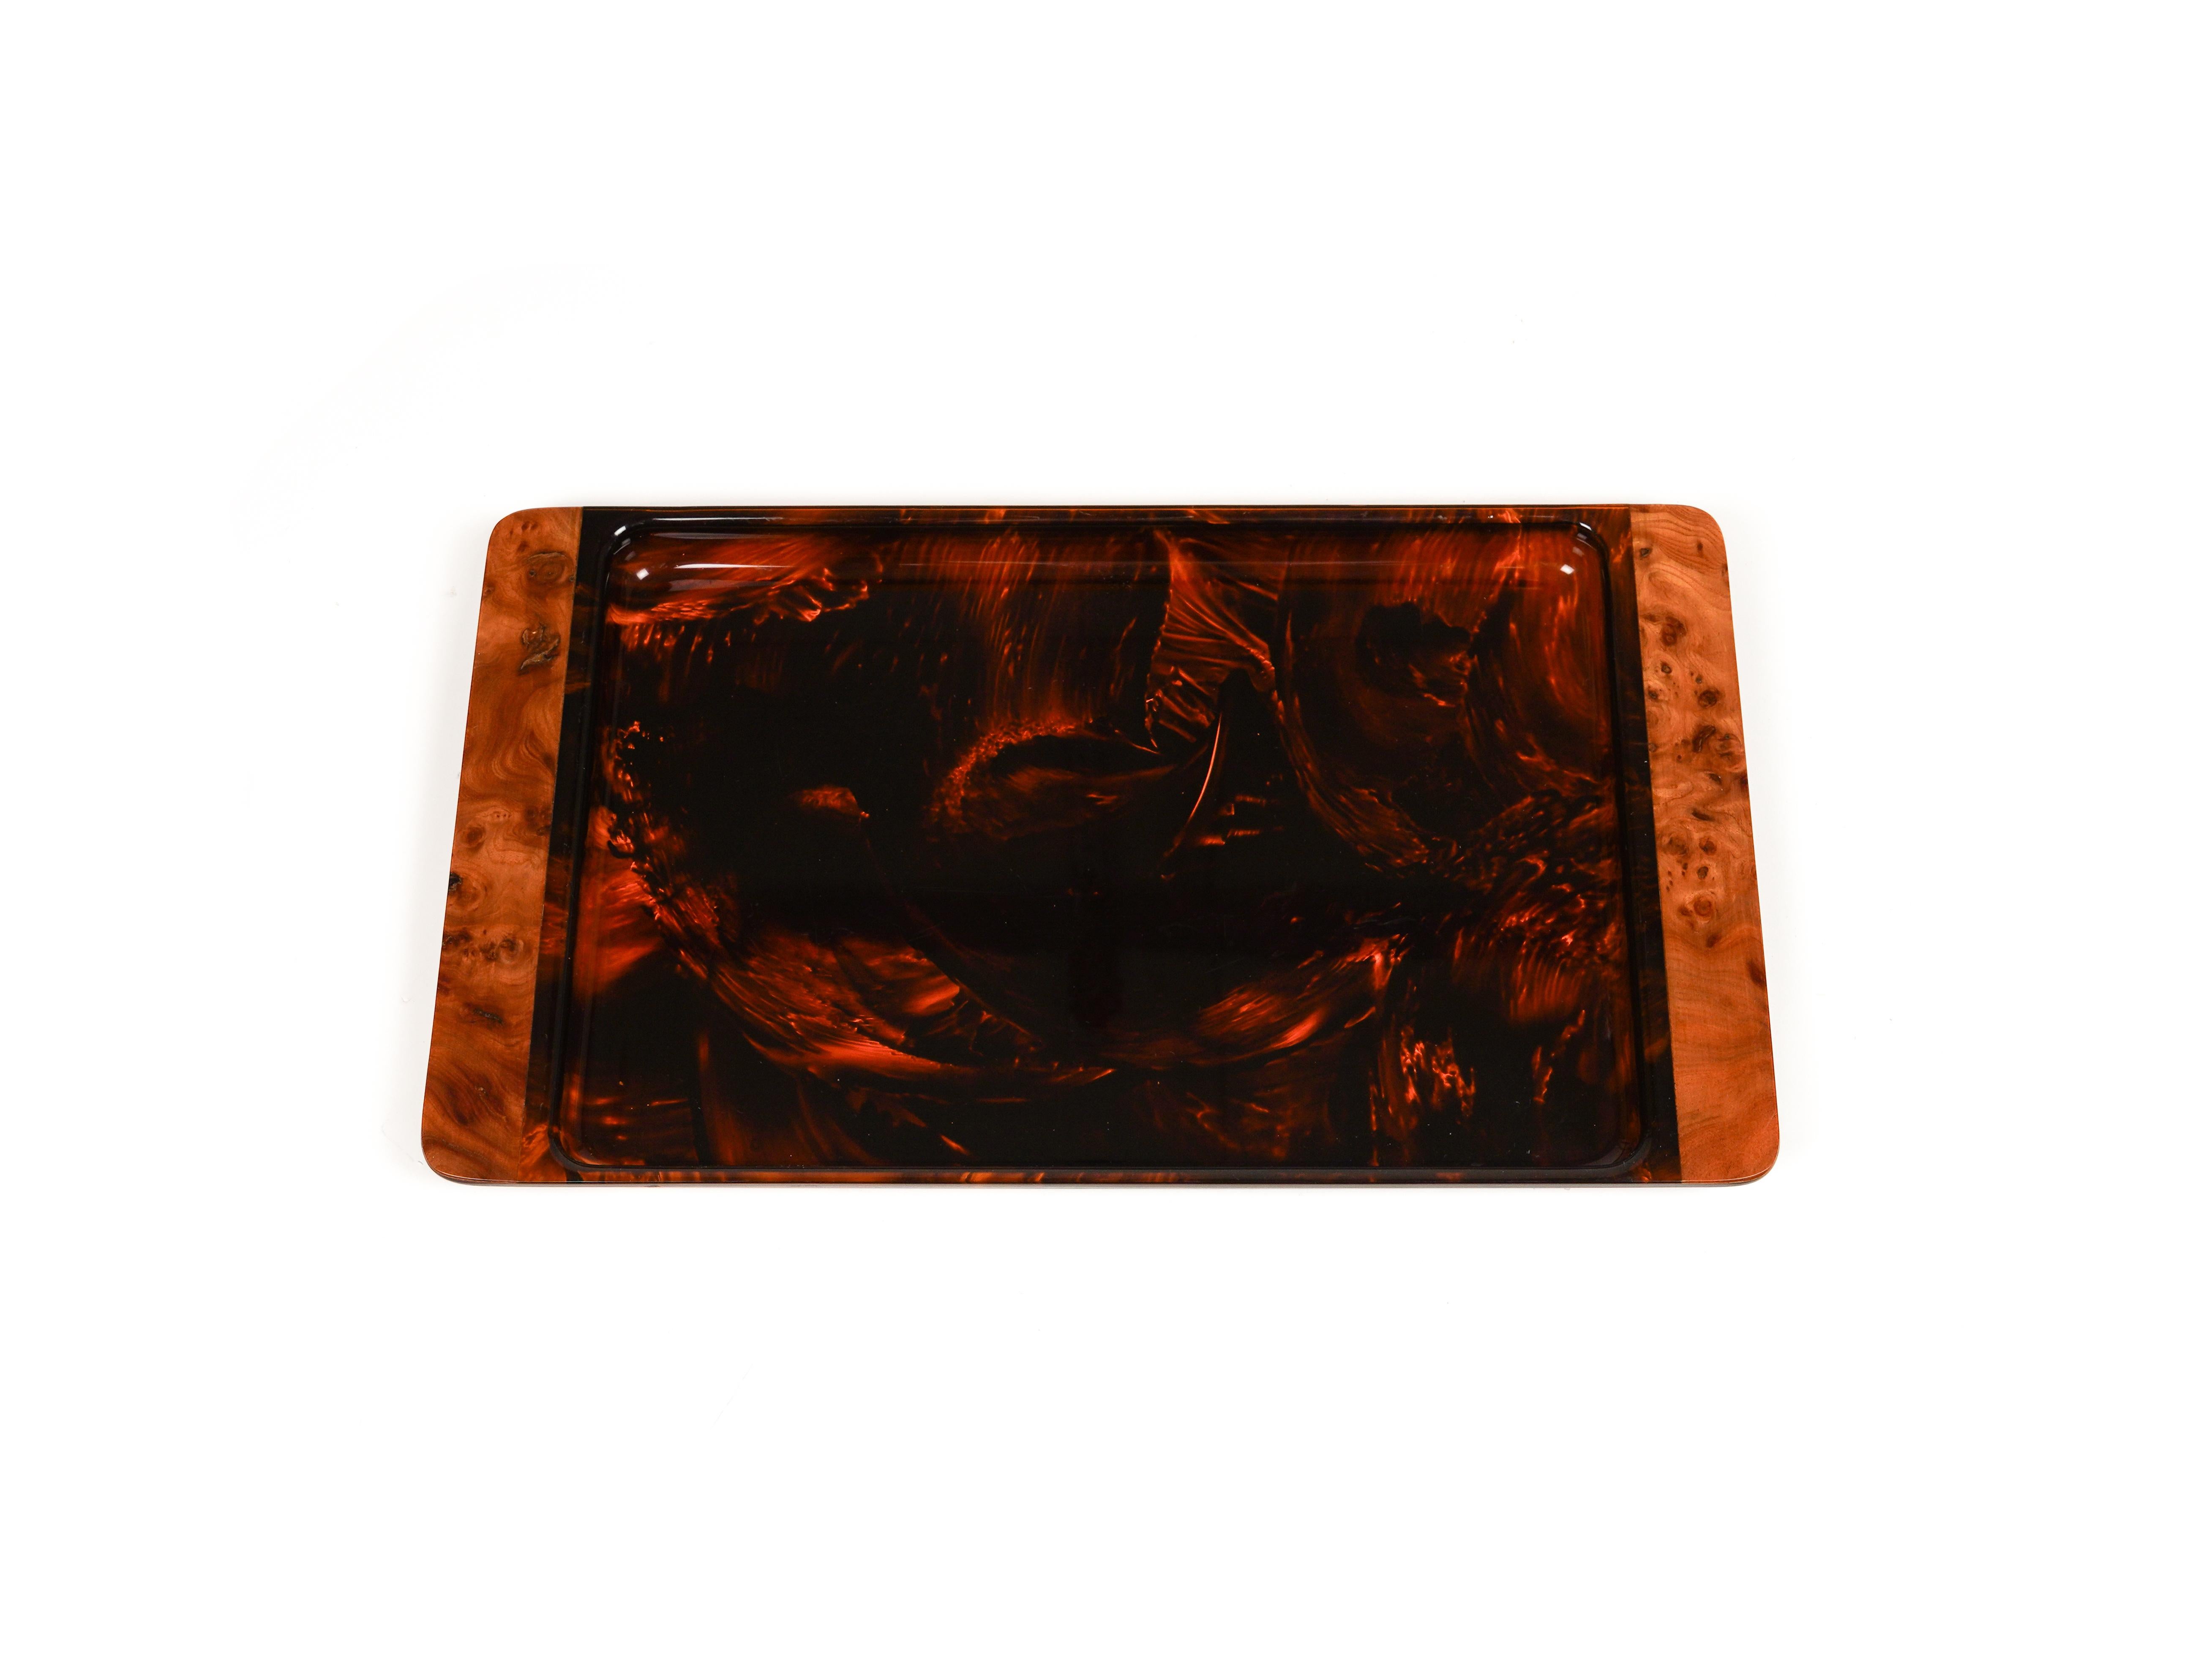 Mid-Century Modern Serving Tray in Effect Tortoiseshell Lucite & Brass by Guzzini, Italy 1970s